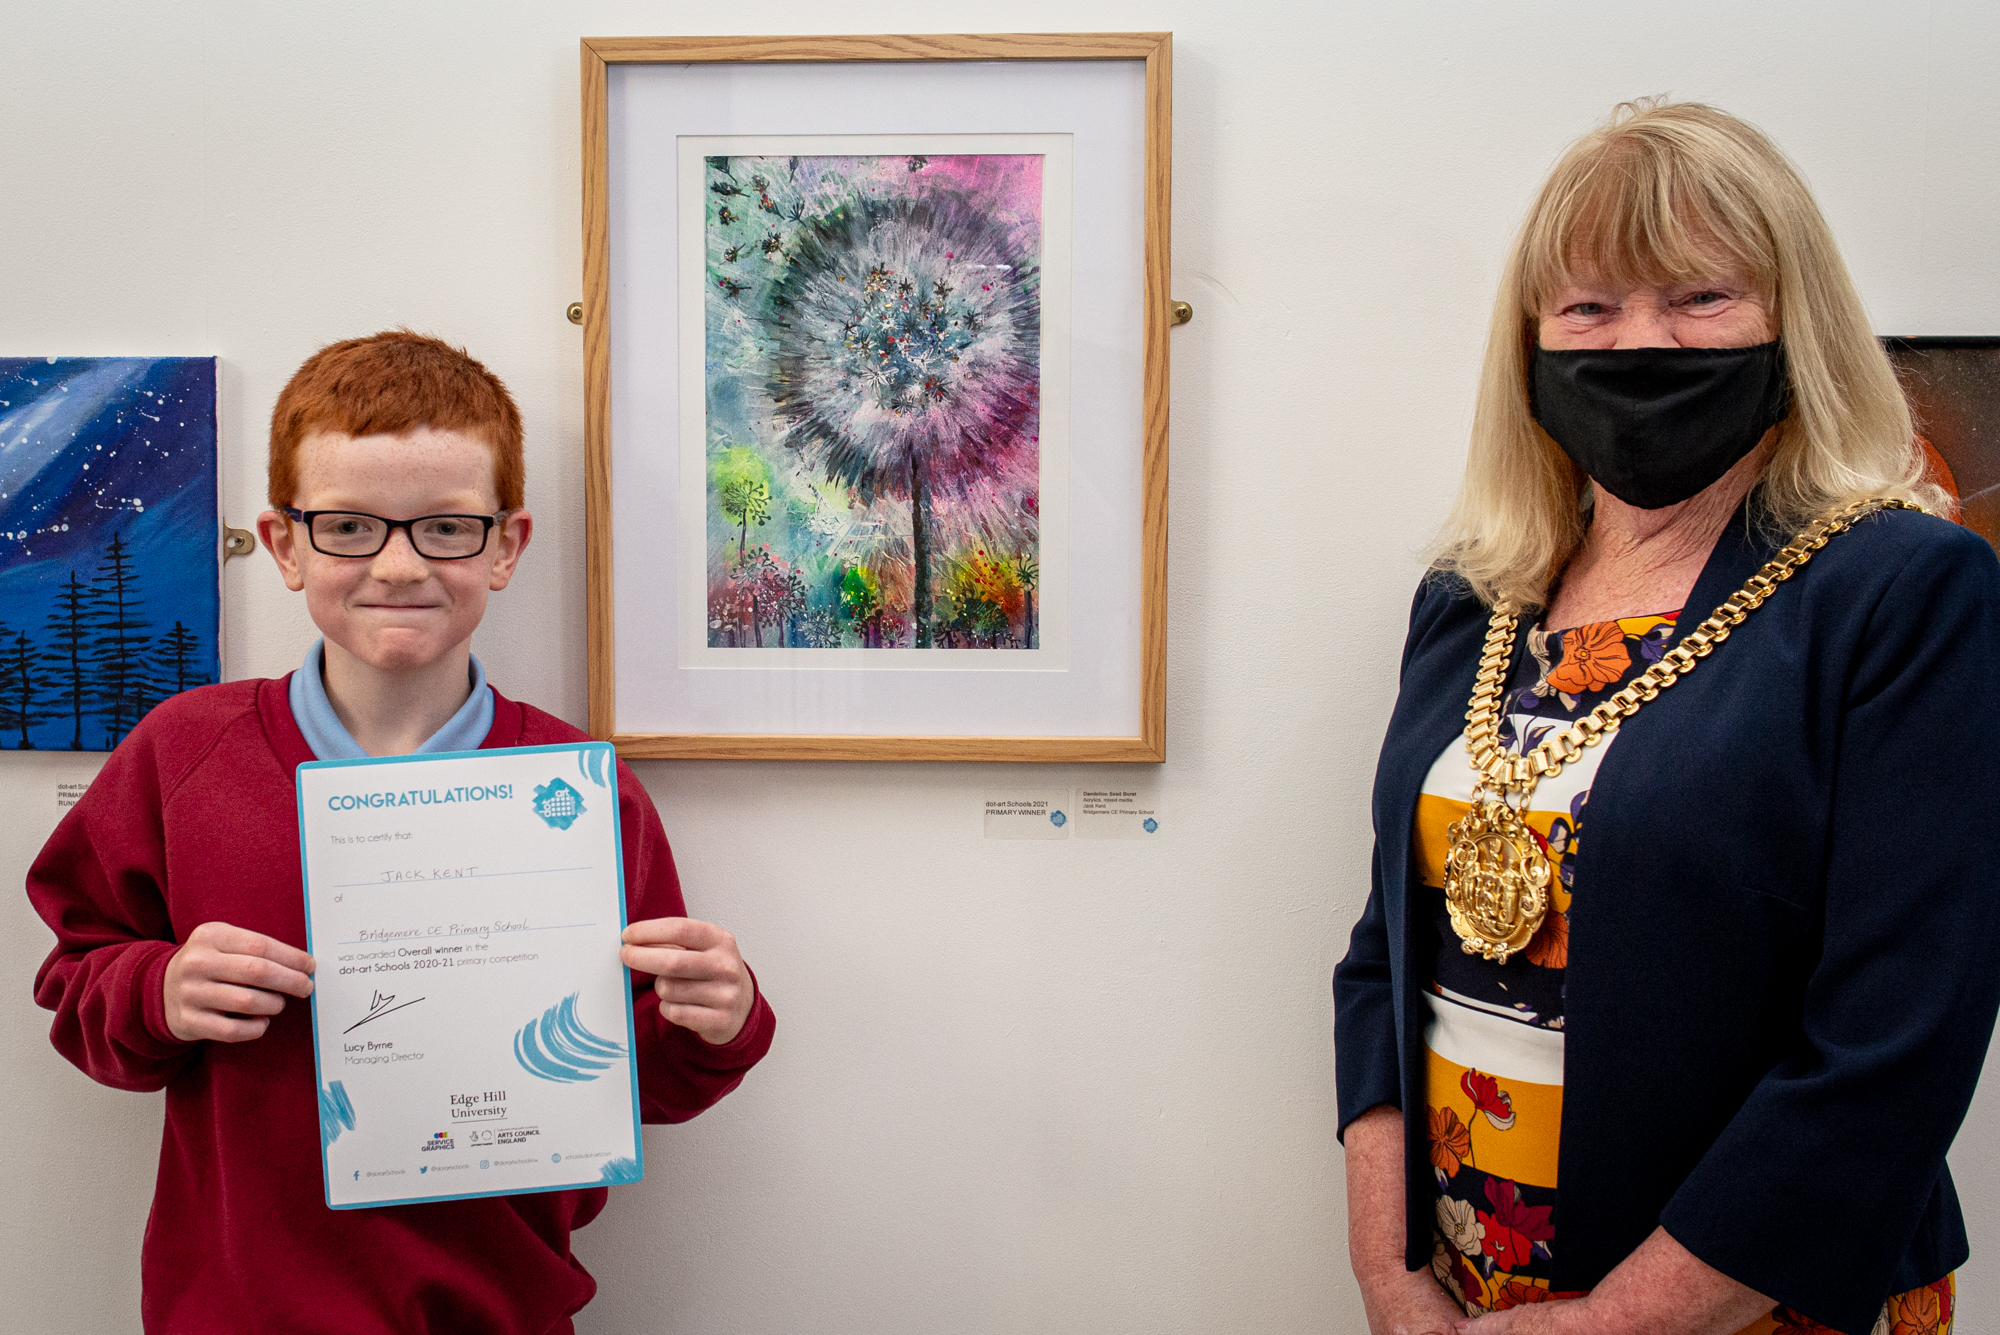 dot-art schools little boy holding certifcate in front of artwork with lord mayor of liverpool to the right